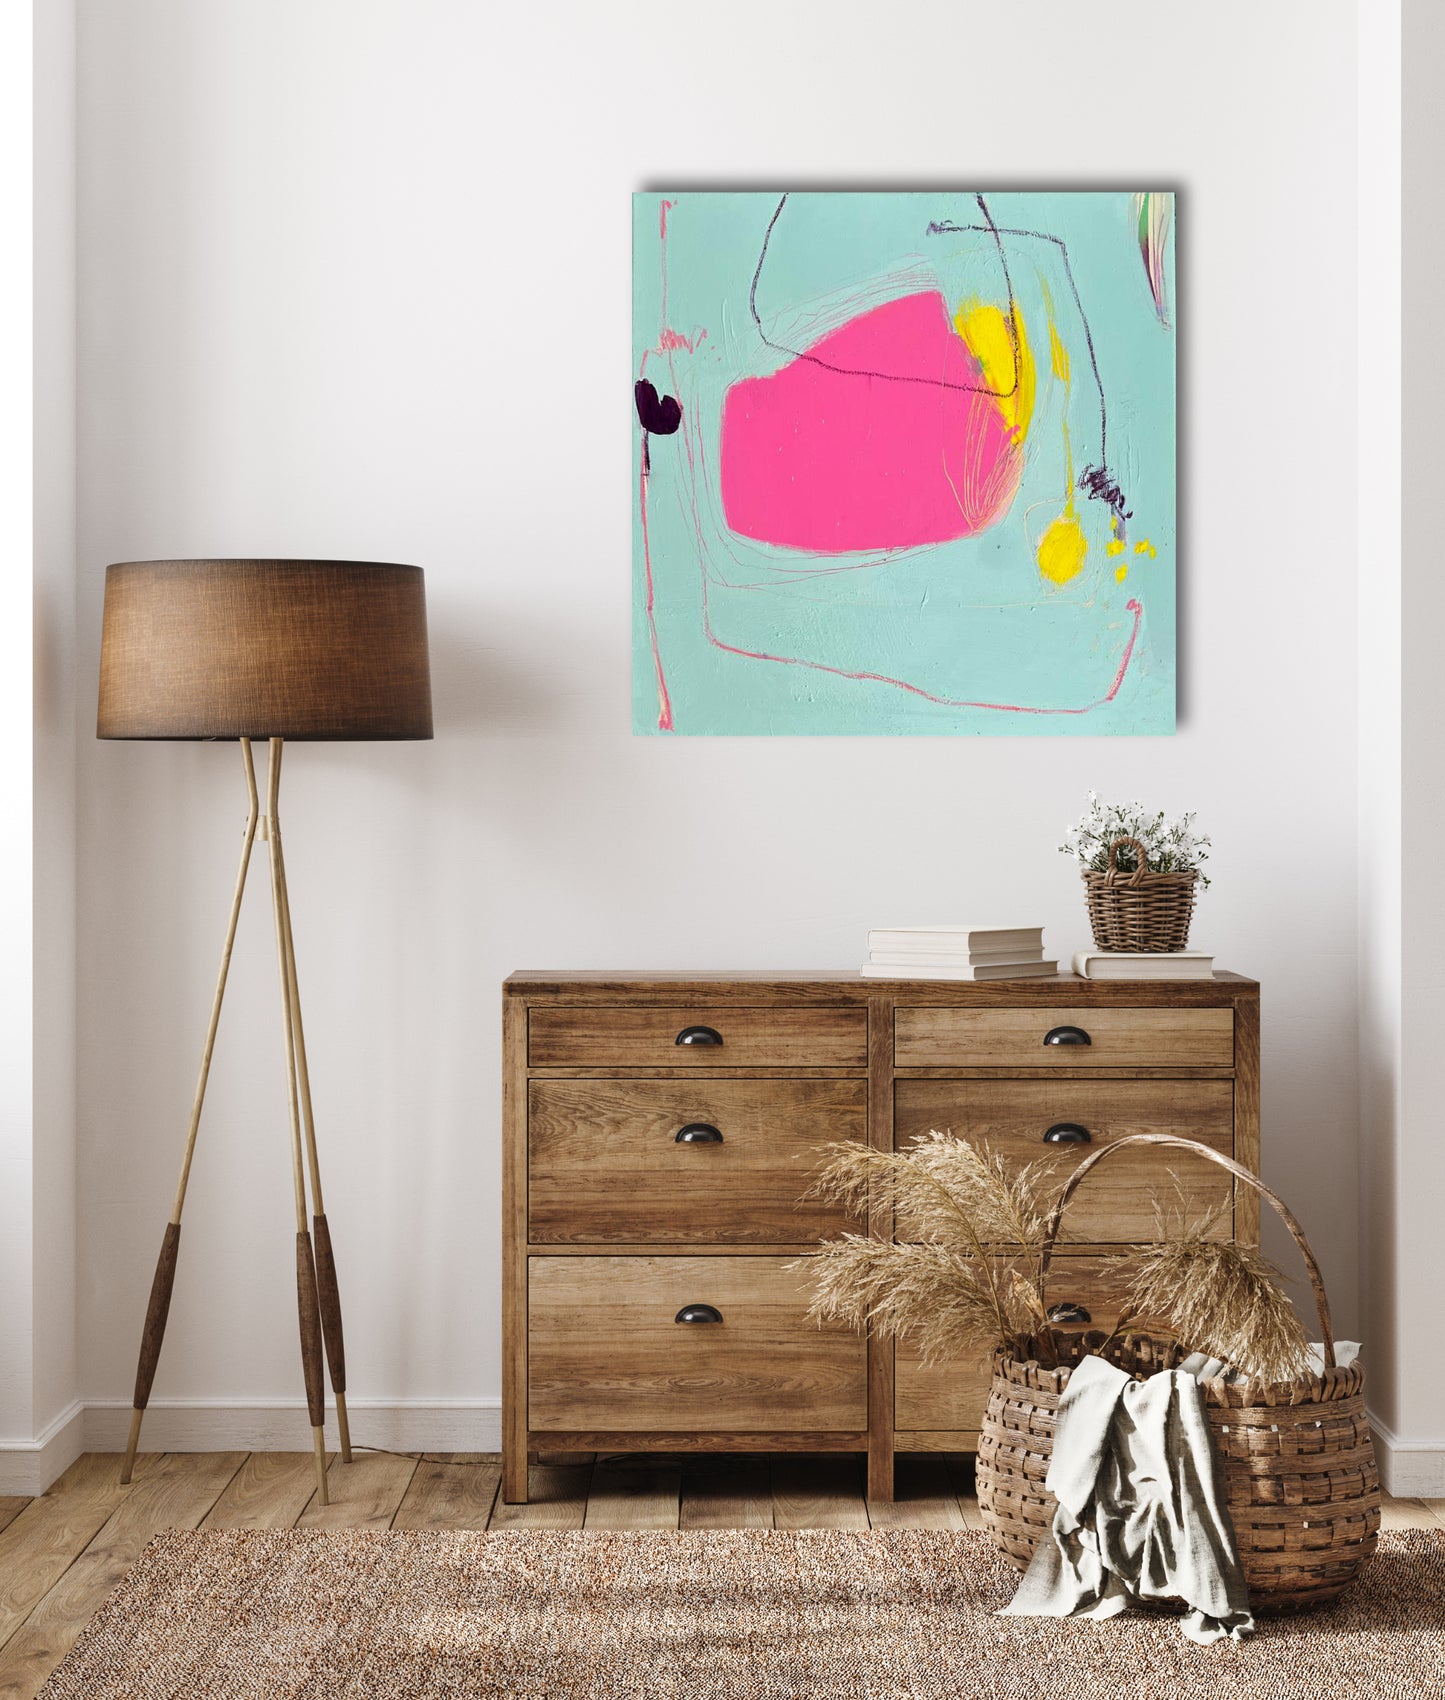 Original Abstraction. Colorful Abstract Art. 